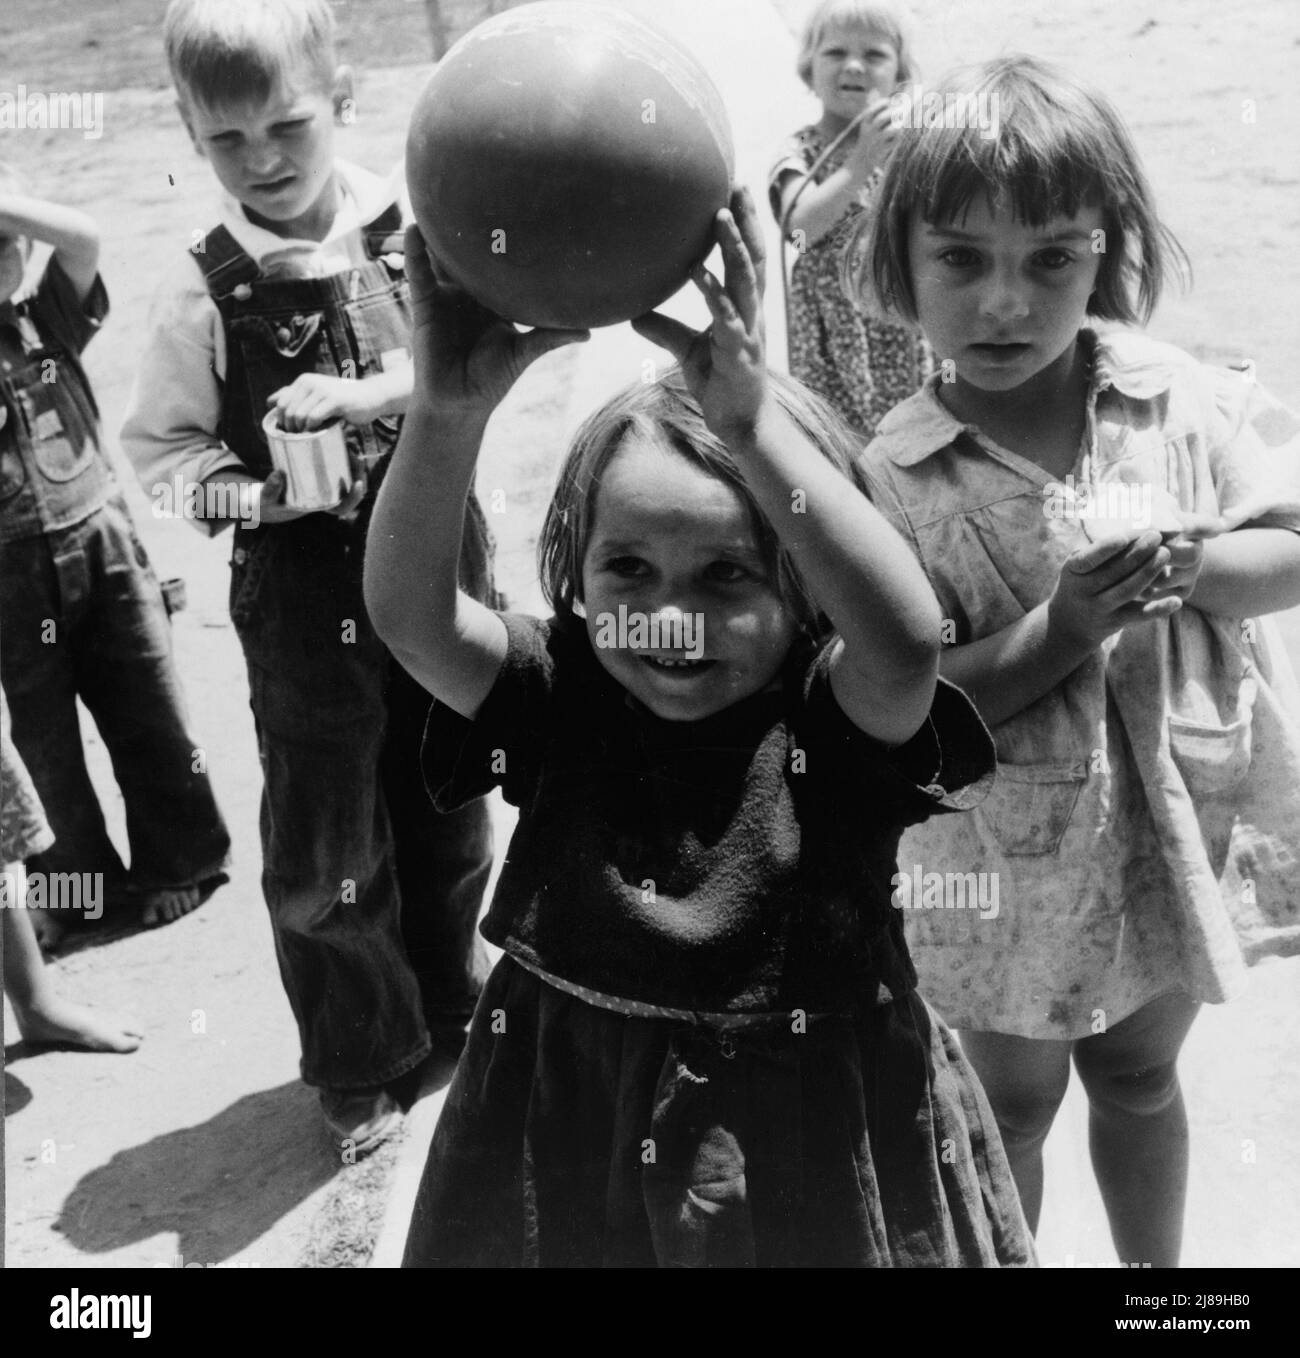 Tulare County. Farm Security Administration (FSA) camp for migrant agricultural workers. Nursery school, showing migrant children playing. California. Stock Photo